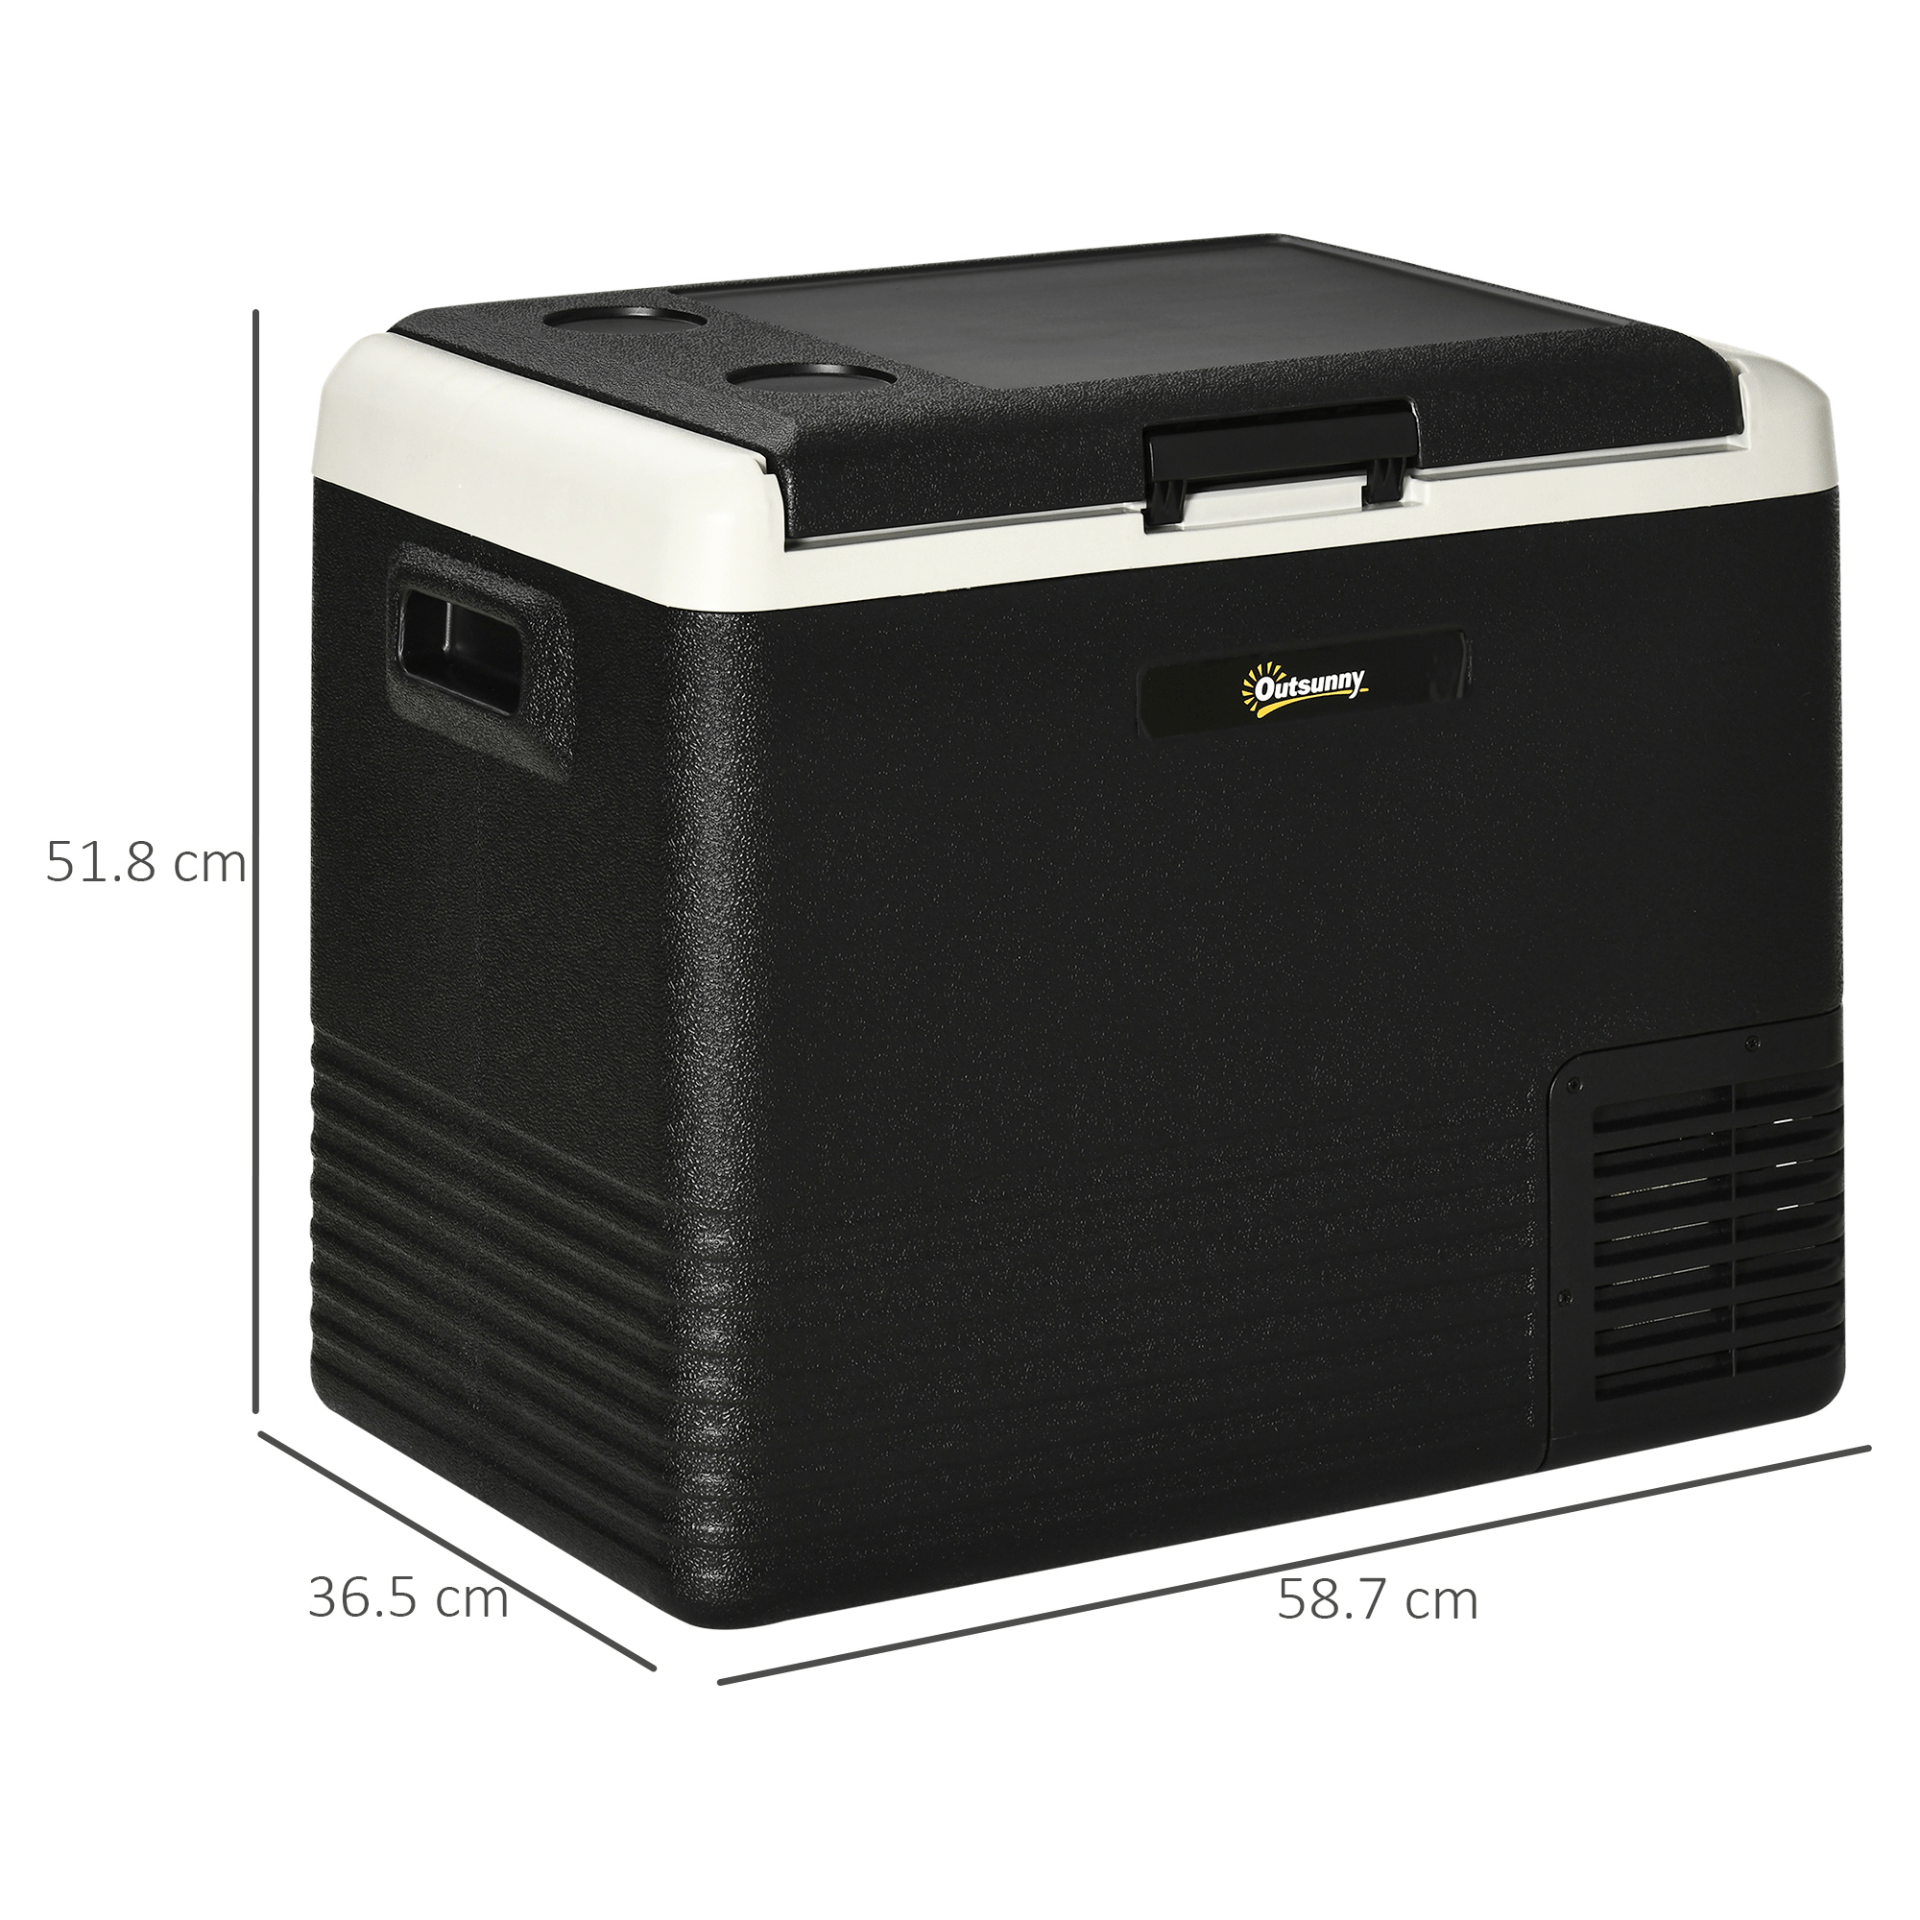 Outsunny 50L Car Refrigerator Cooler Cosy Camping Co.   